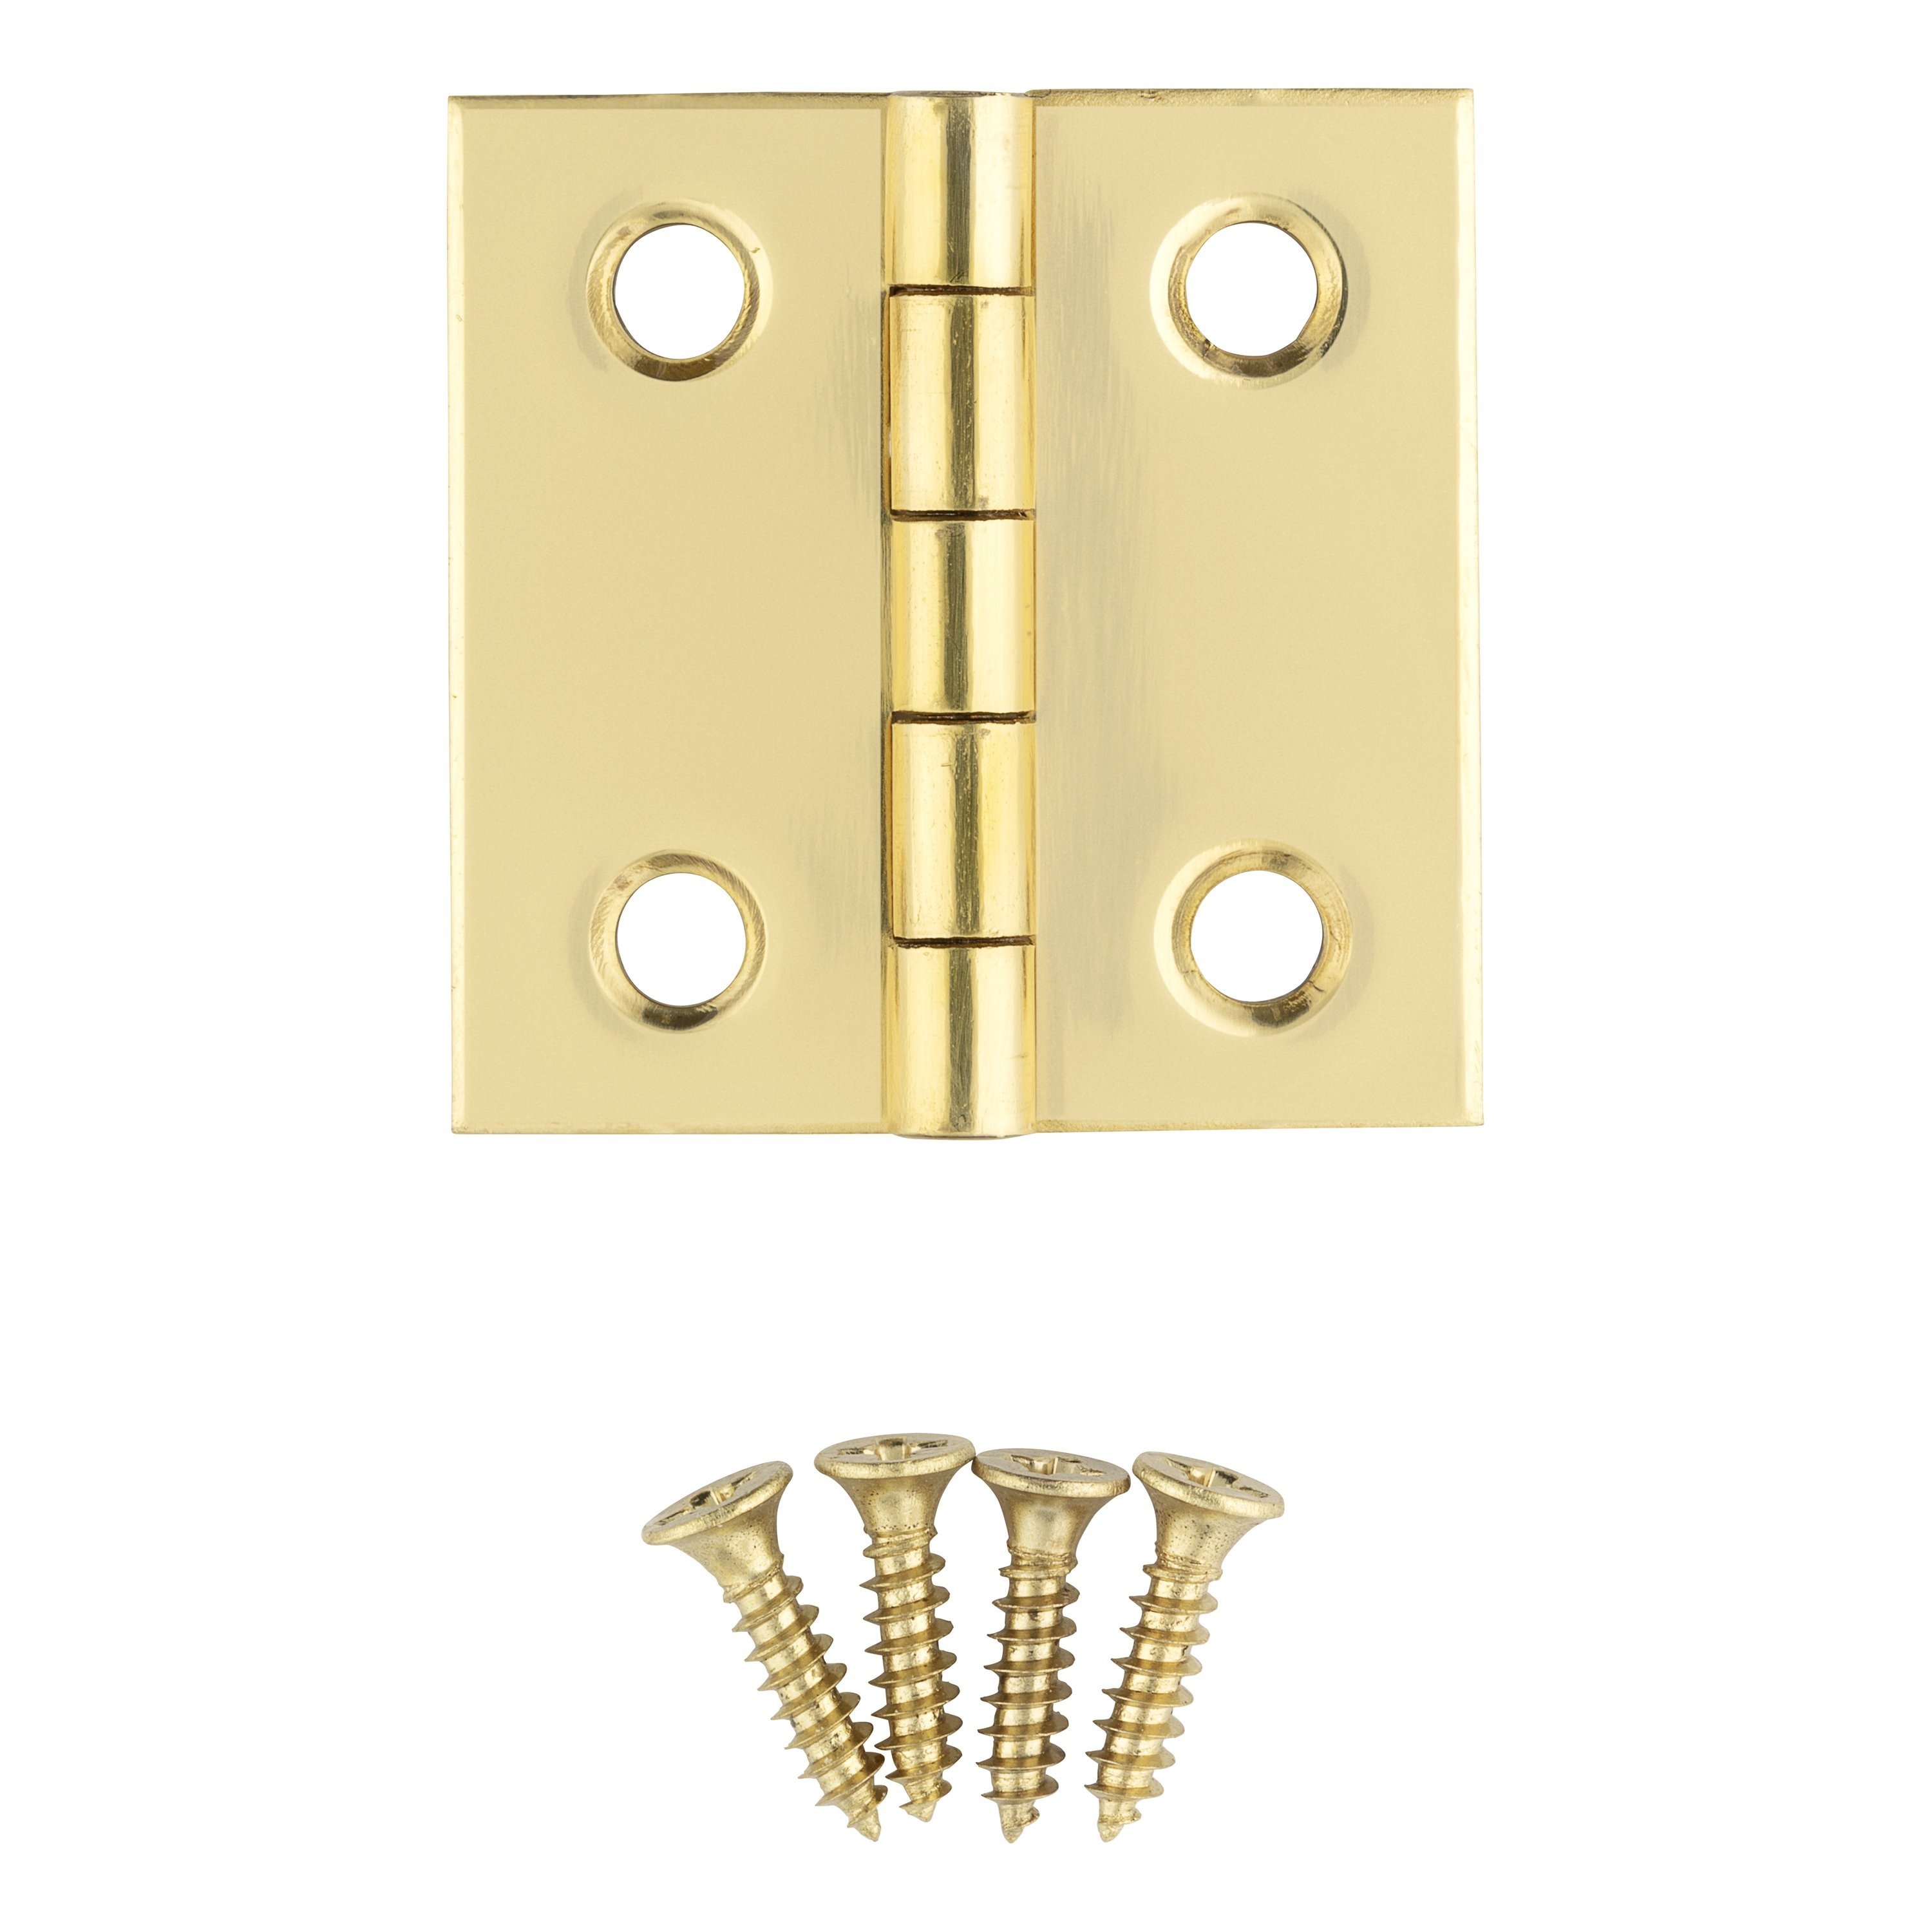 Mcredy brass hinges mcredy box hinge gold small brass hinges with mounting  screws butt hinges 1 inch pack of 6